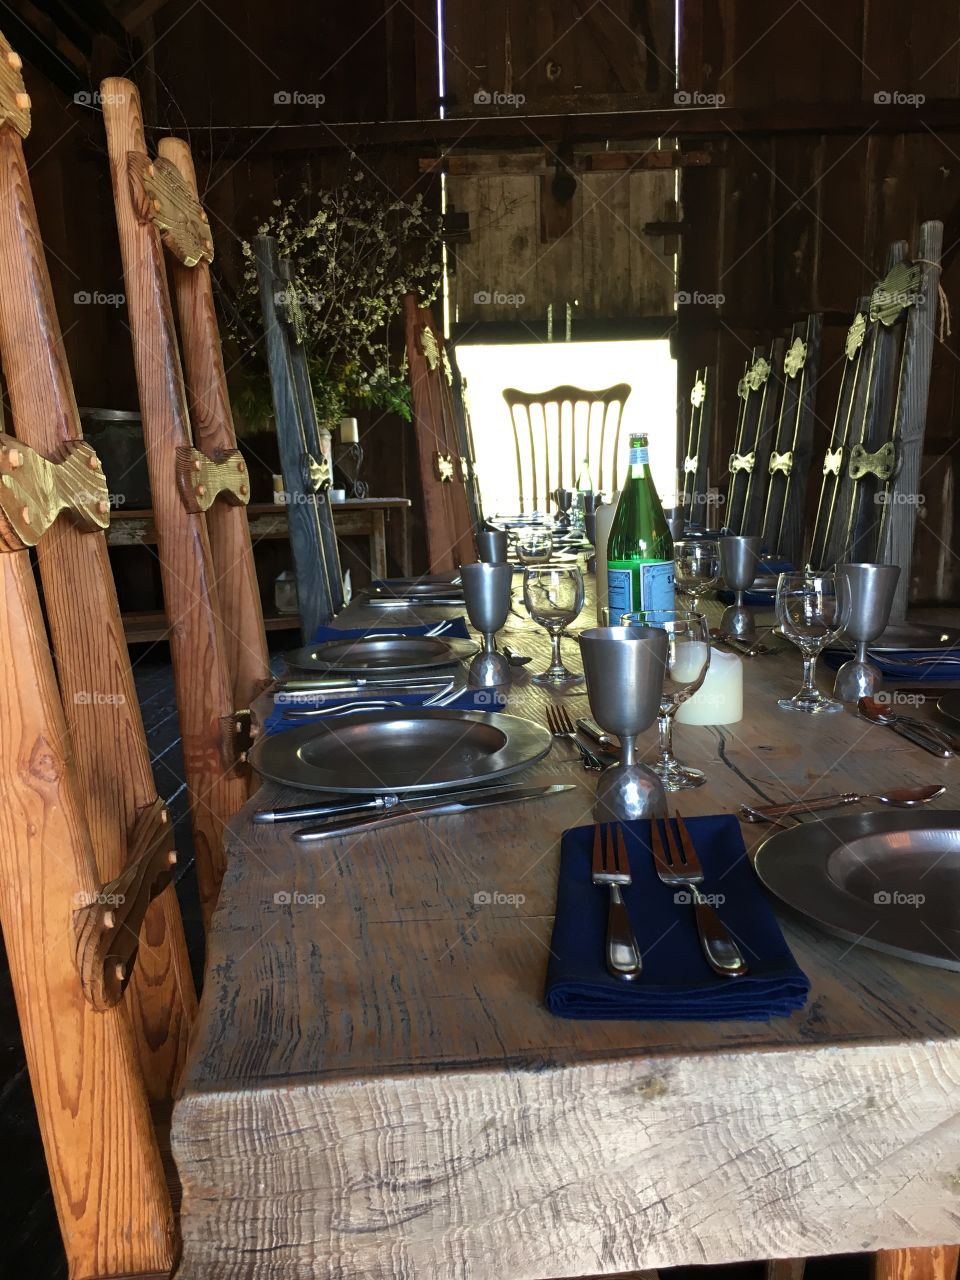 Preparations made for evening dinner, all the silverware and plates are out.  Ready for dinner guests in the lovely rustic barn